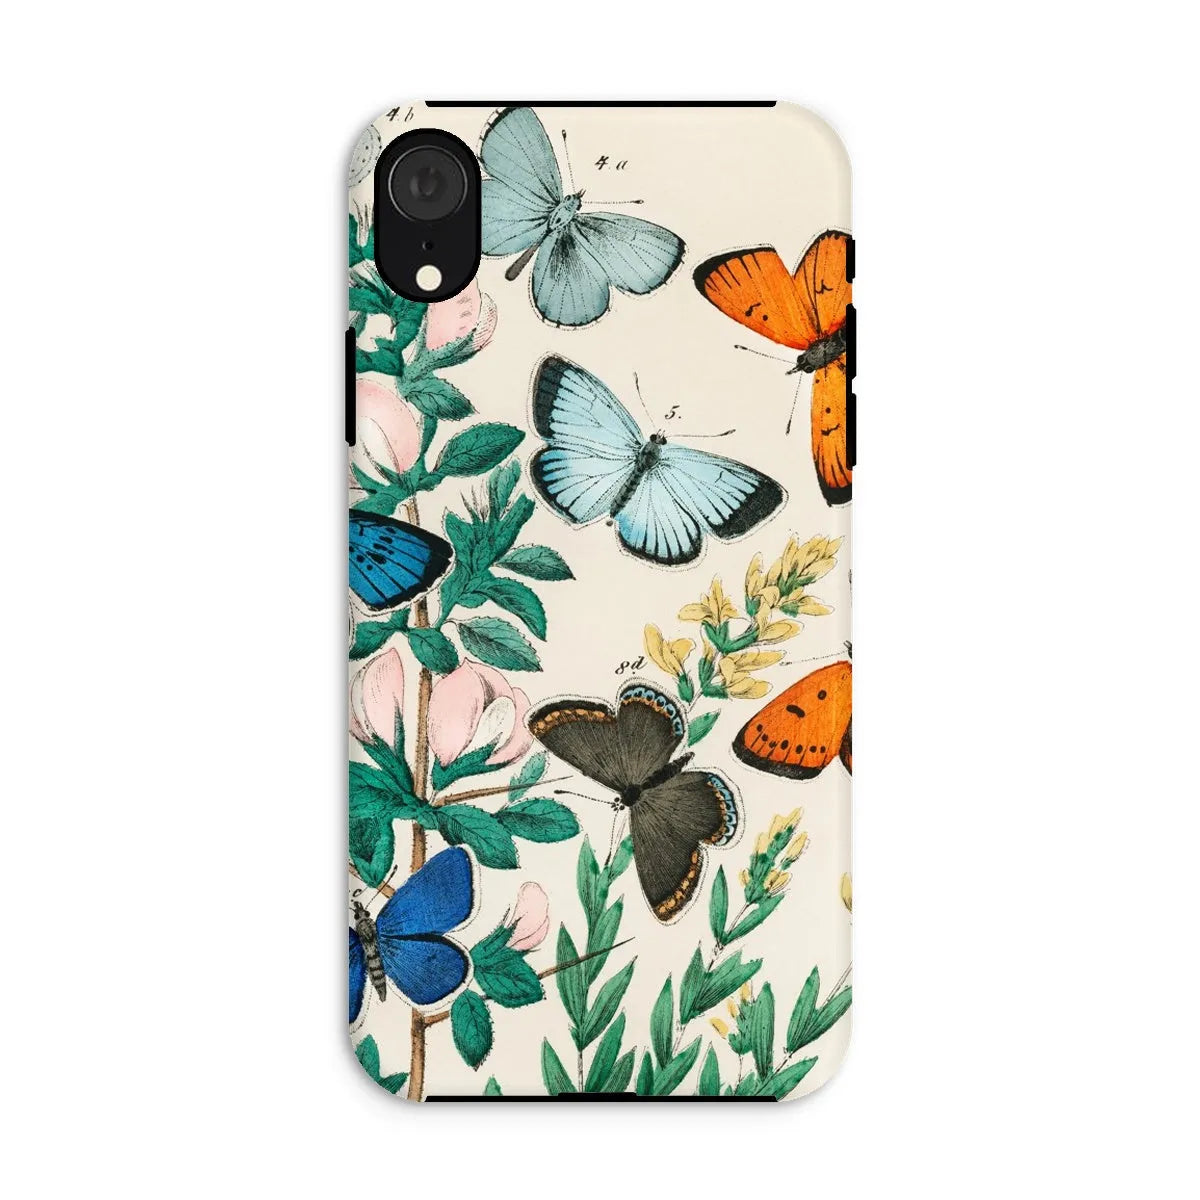 Another Butterfly Aesthetic Art Phone Case - William Forsell Kirby - Iphone Xr / Matte - Mobile Phone Cases - Aesthetic